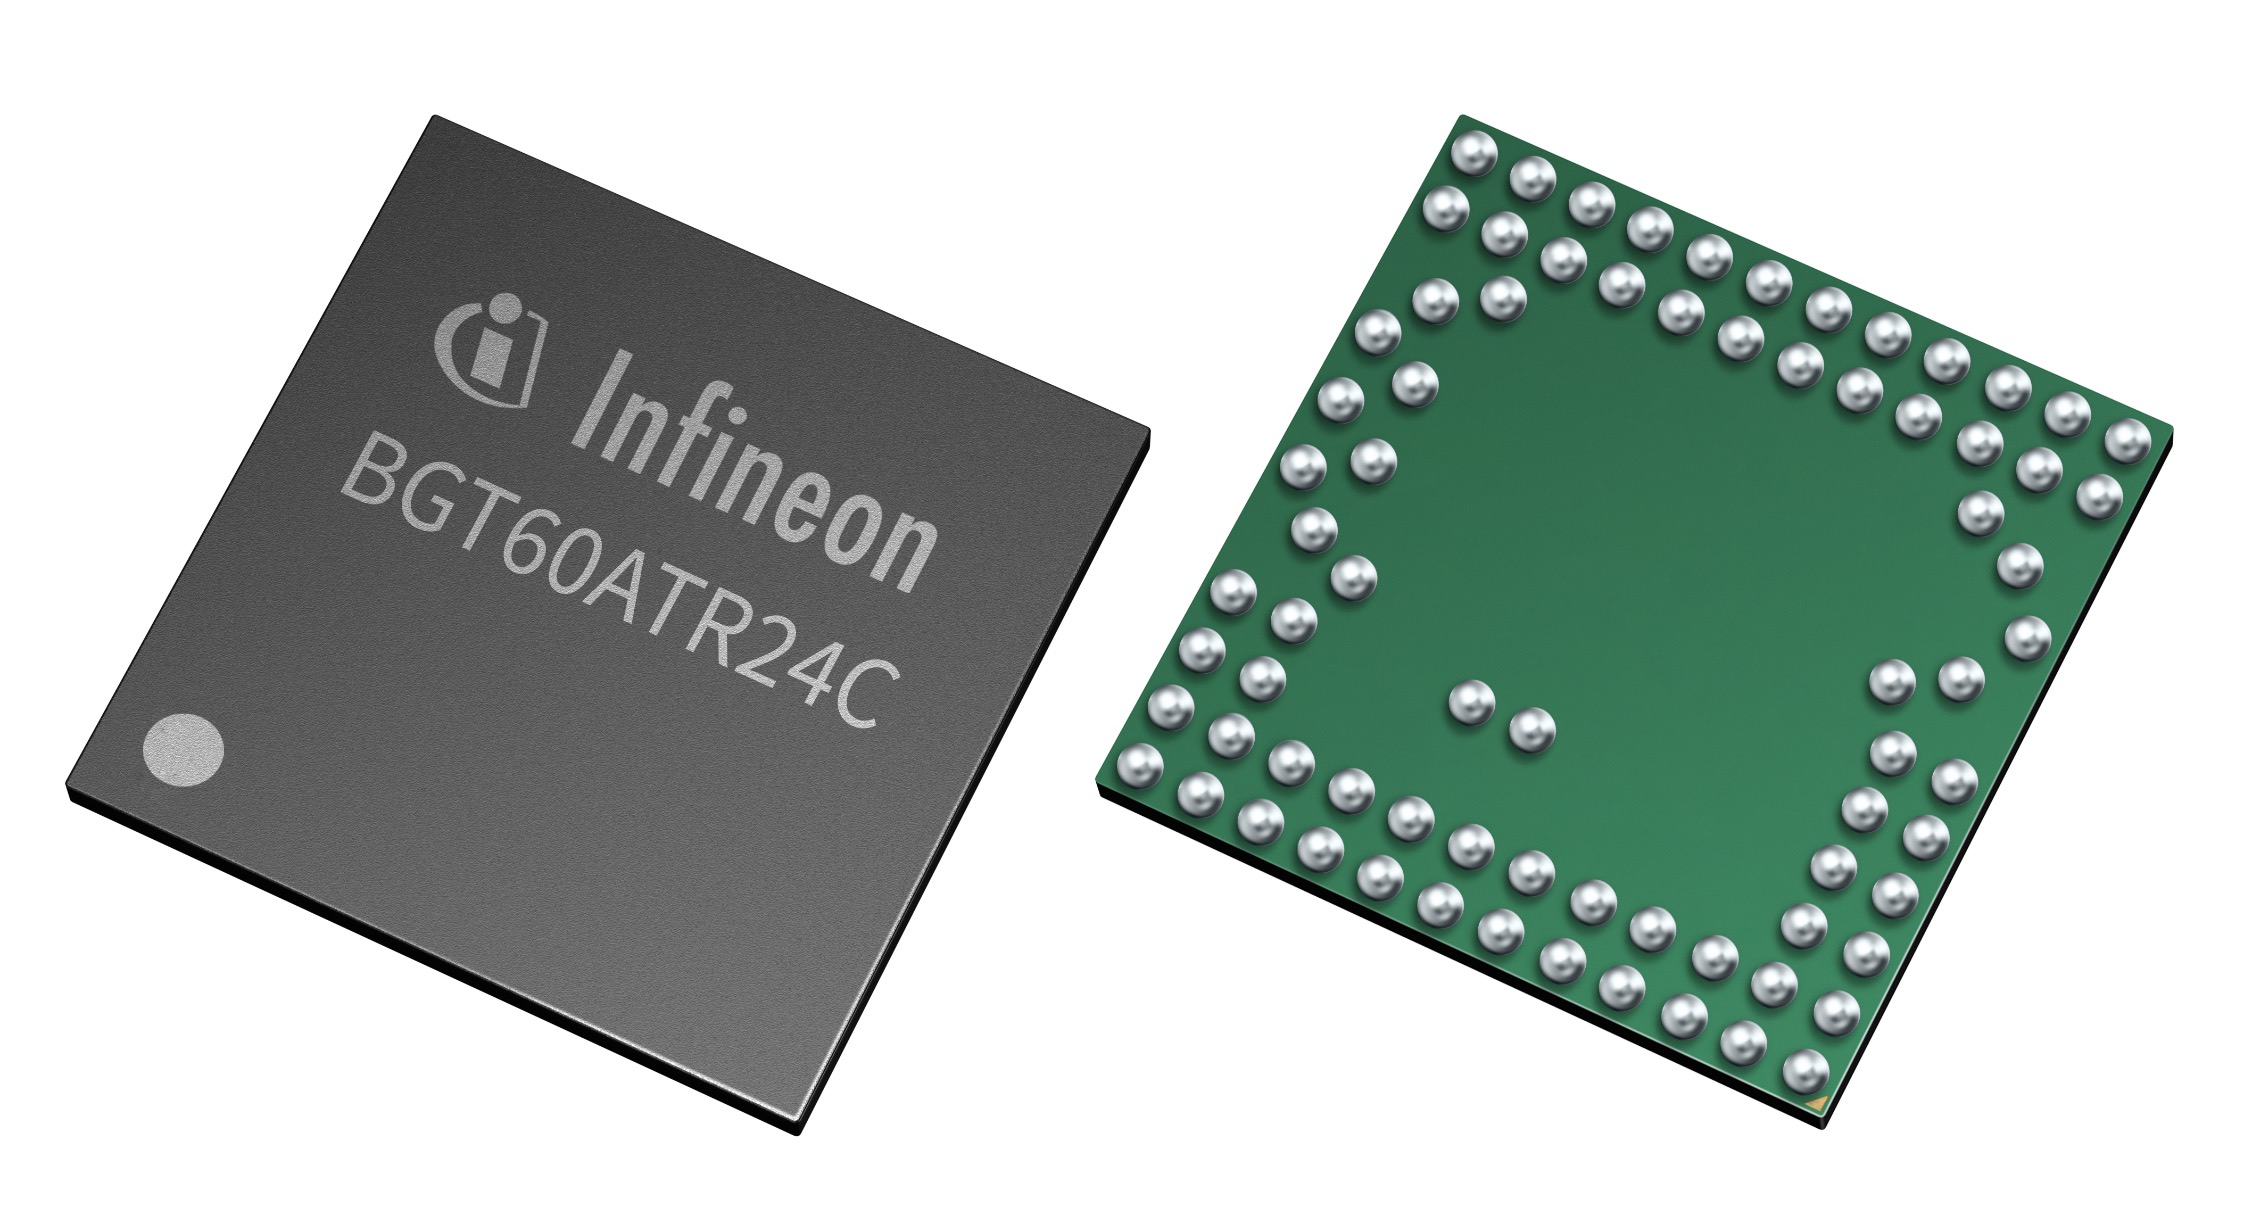 60 GHz Radar Sensor for Automotive Enables Highly Reliable In-Cabin Monitoring Systems